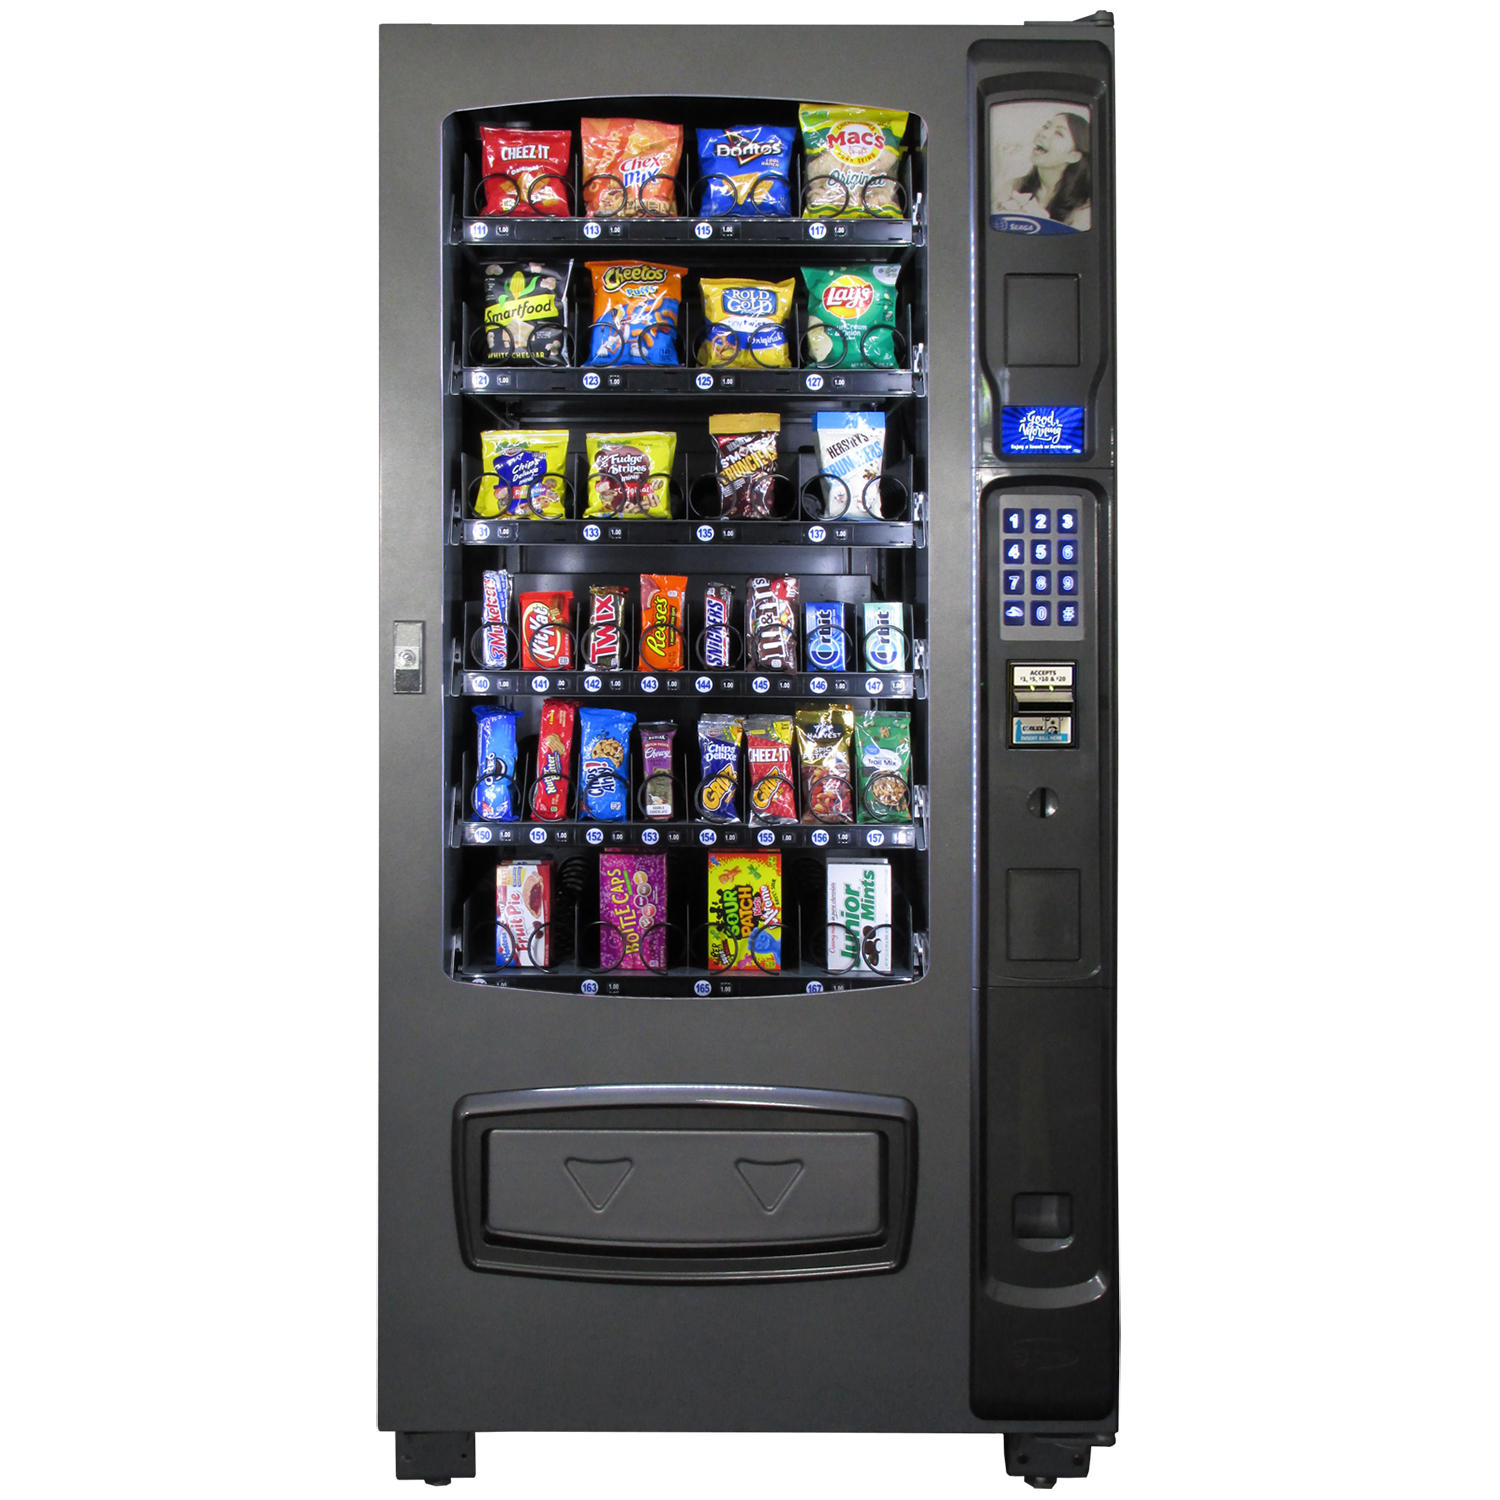 Seaga EnVision Snack Vending Machine, 32-Selections (without CC reader)